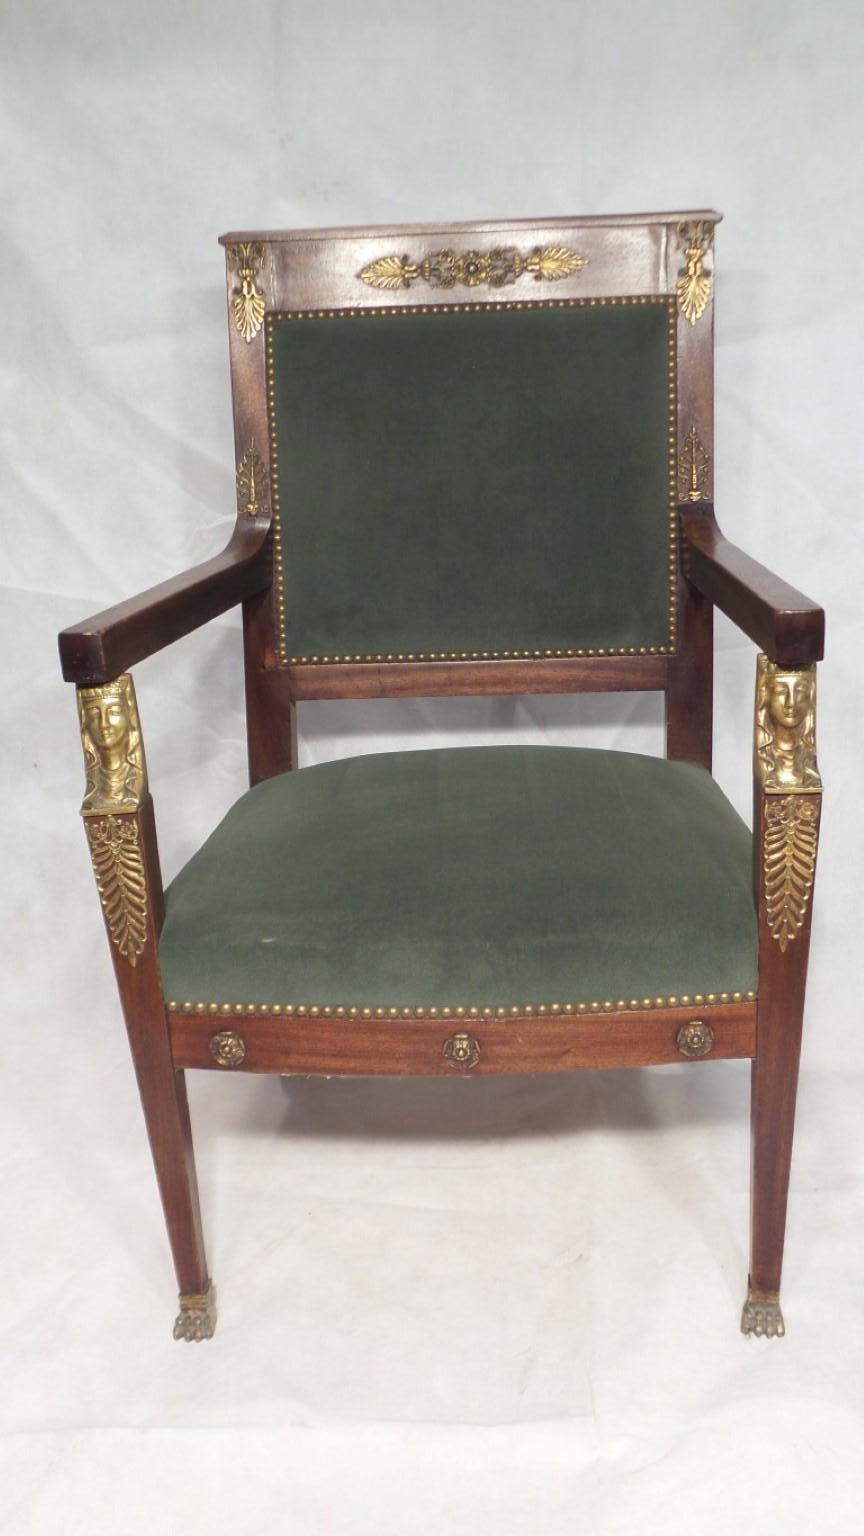 A wonderful Egyptian revival antique chair in mahogany originating from France in the later period of the 19th century. This lovely chair is complimented by ormolu mounts in the form of Egyptian ladies face on the arms and decorative ormolu frets on